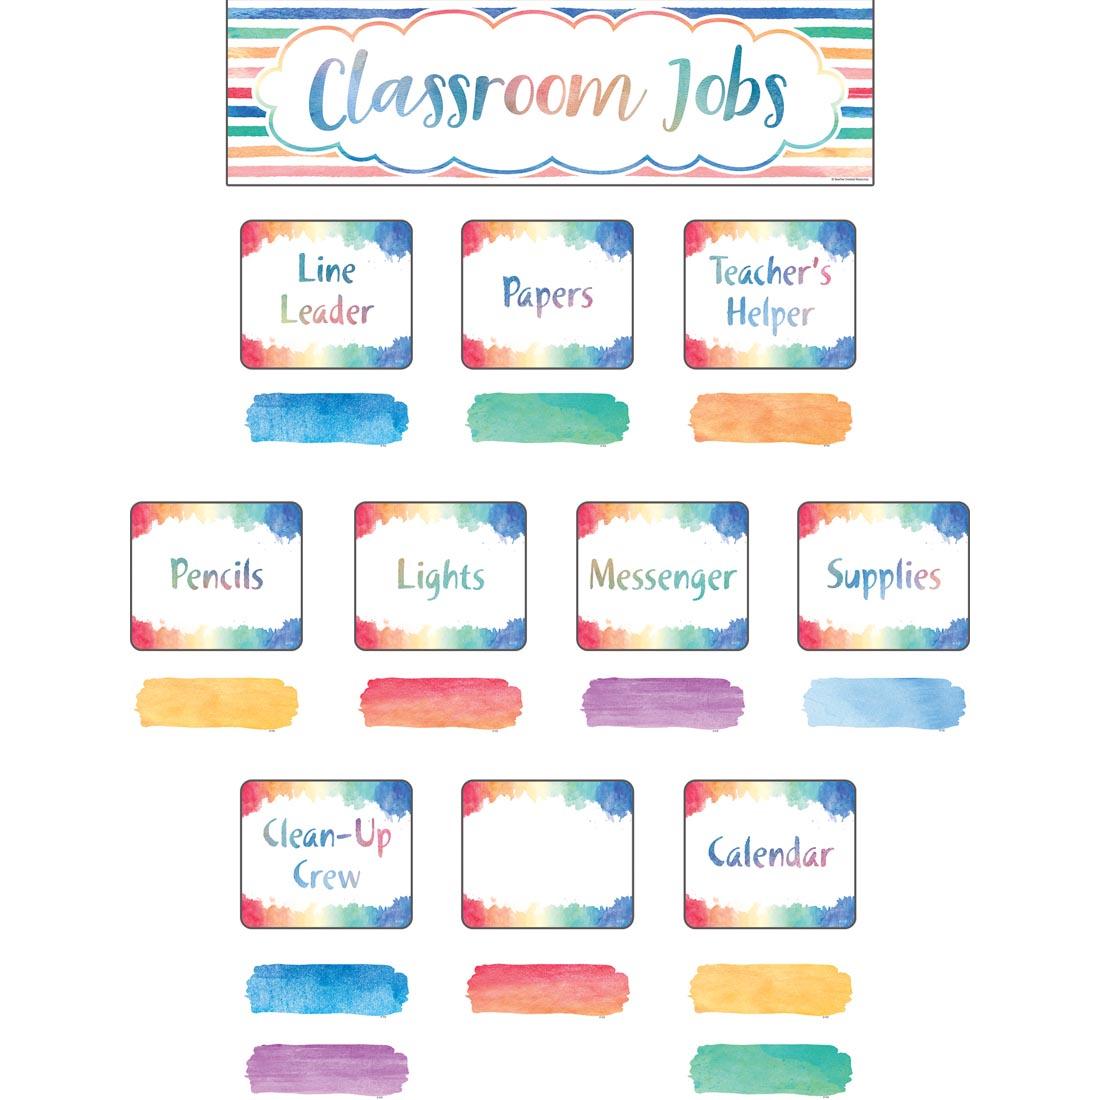 Classroom Jobs Mini Bulletin Board Set from the Watercolor collection by Teacher Created Resources